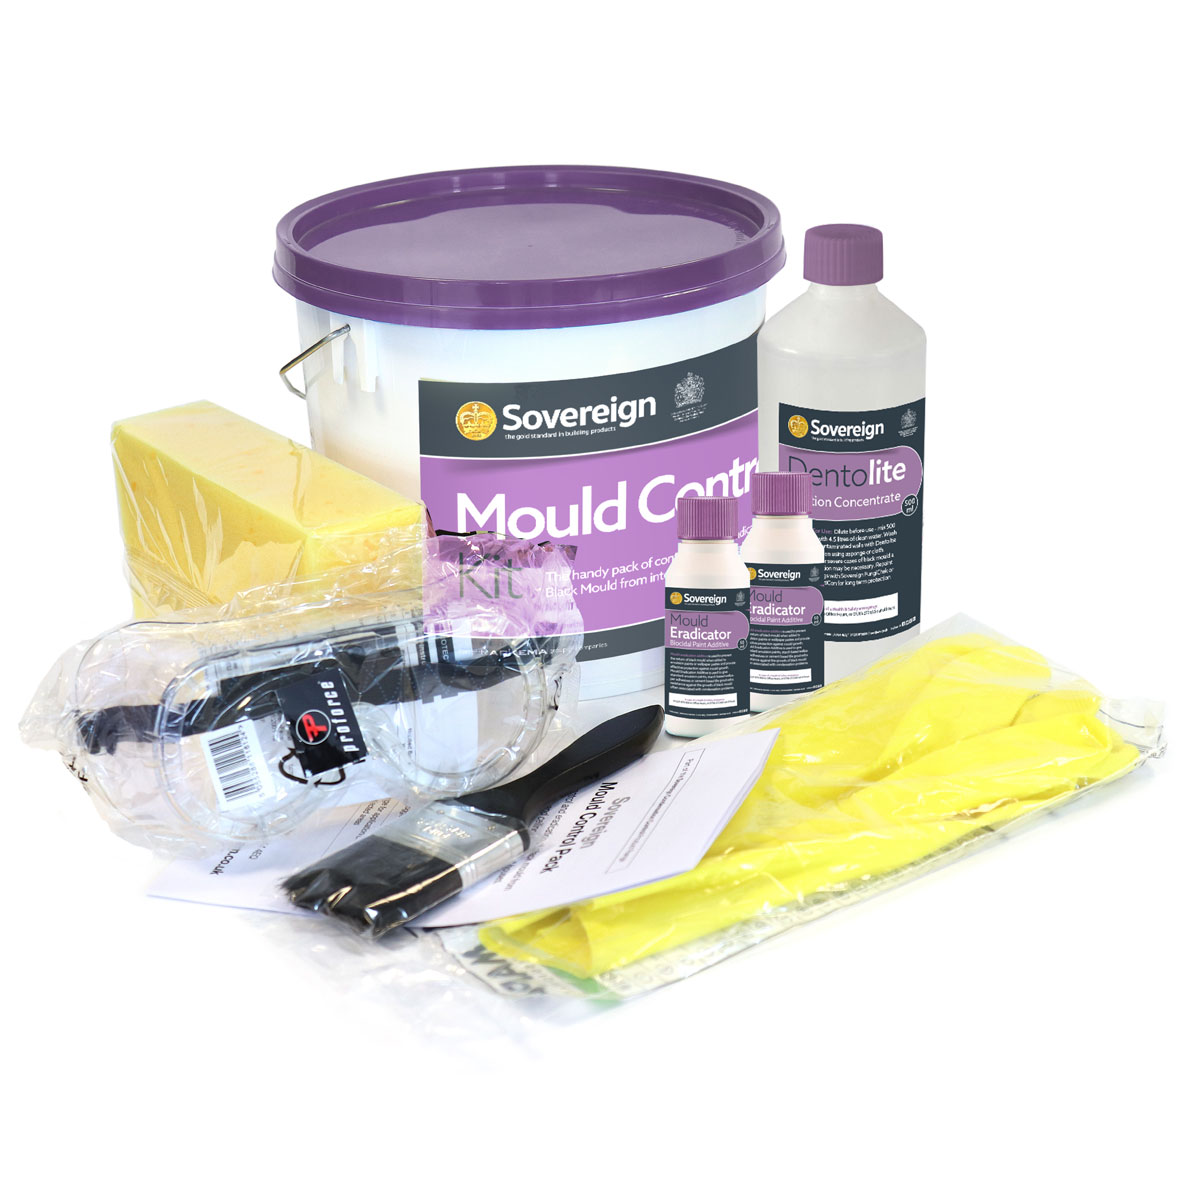 Sovereign Mould Control Kit 